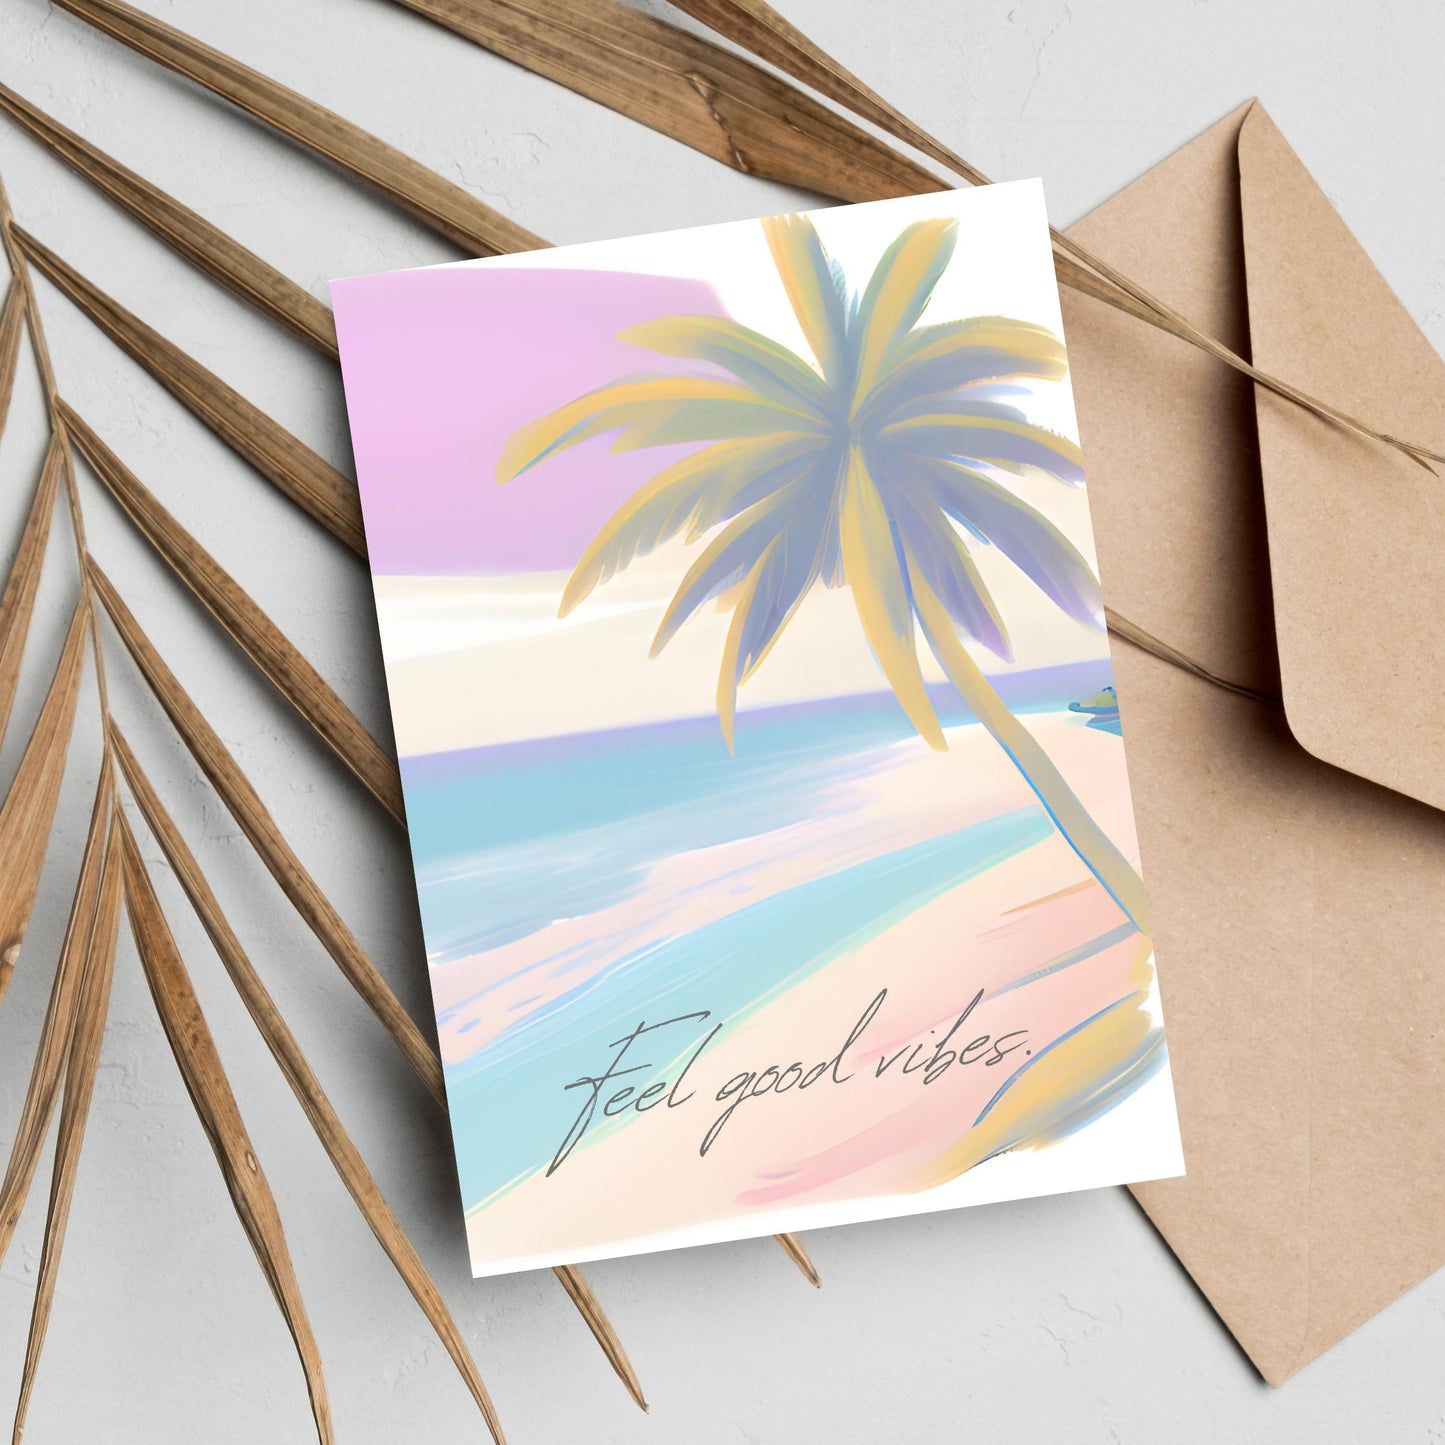 Wording Printable Card, Sweet Beach Vol.2, card size 5"x7", print on 8.5"x11" paper size